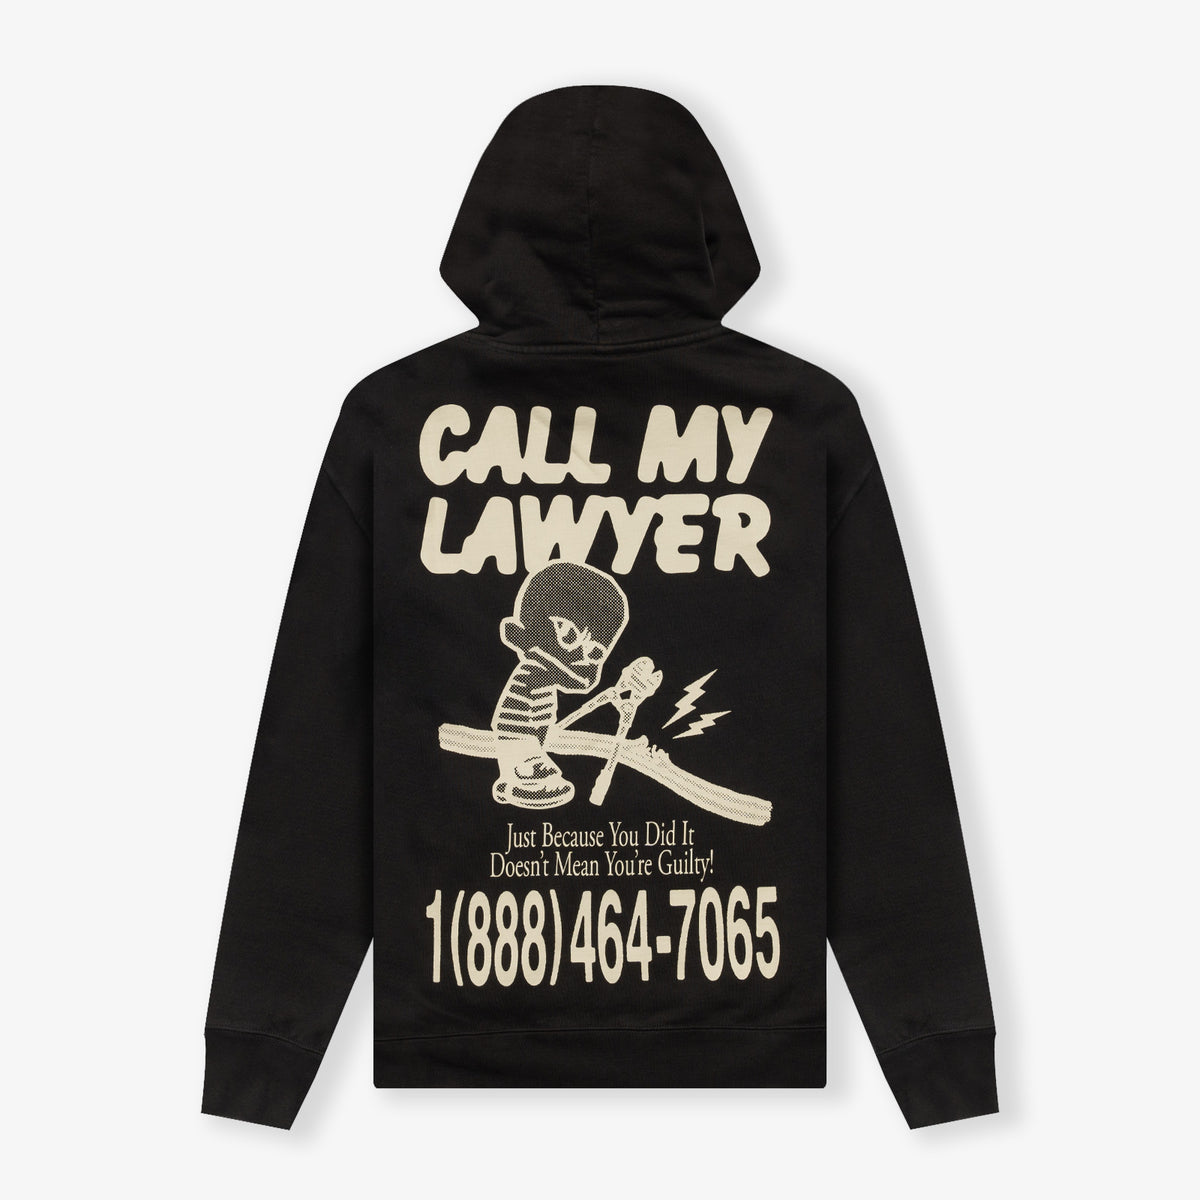 Not Guilty Hoodie - Washed Black